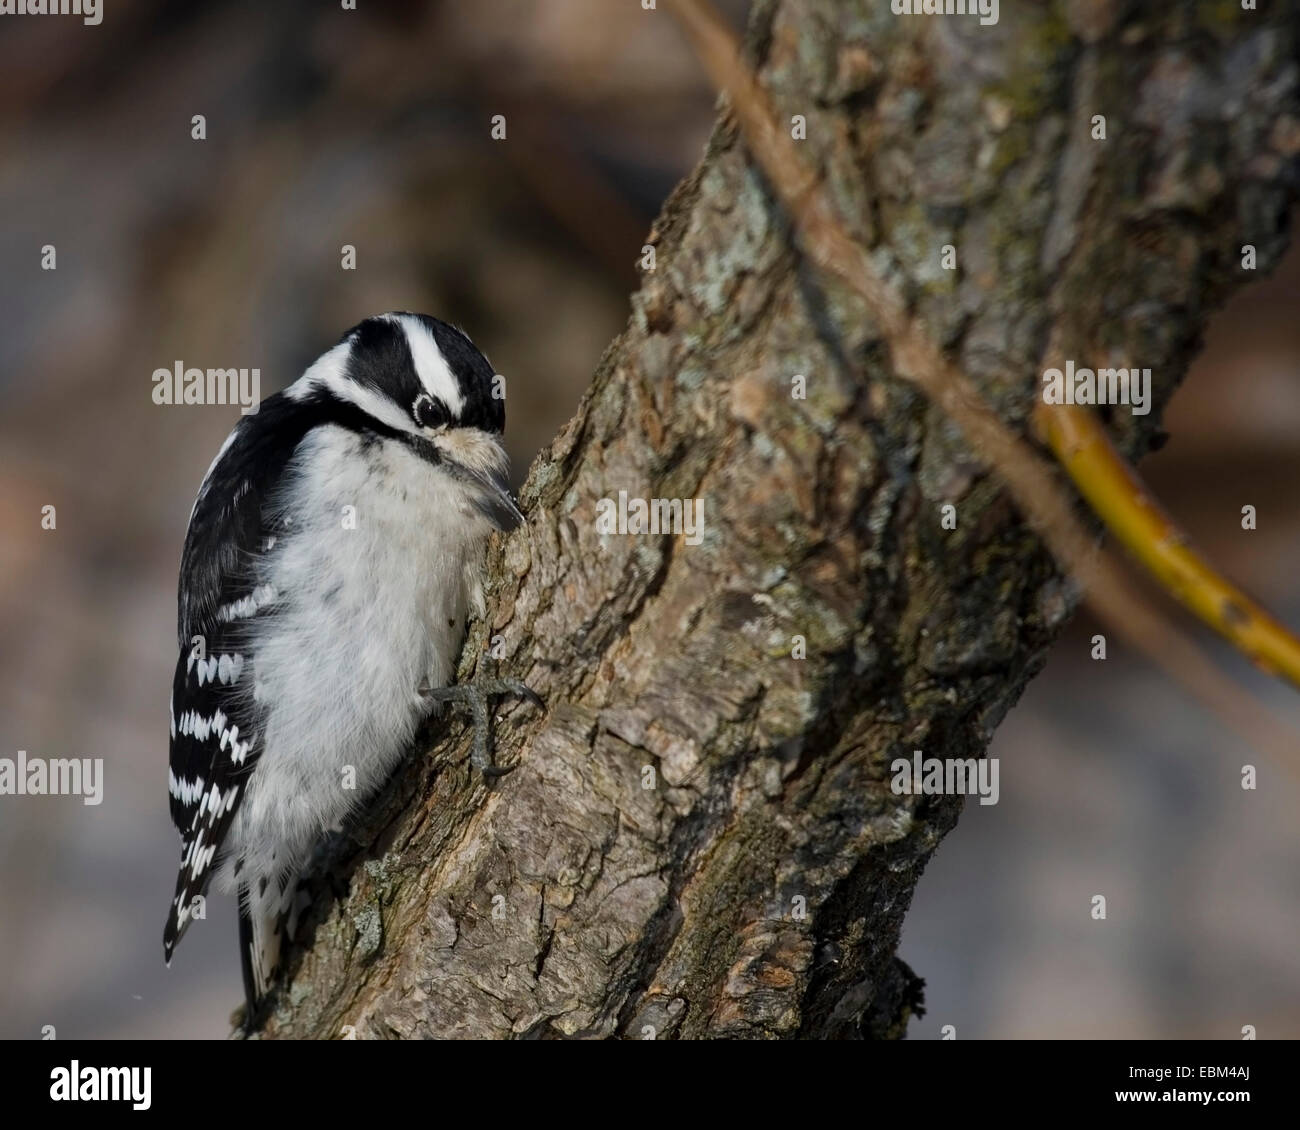 Downy woodpecker perched on a tree. Stock Photo